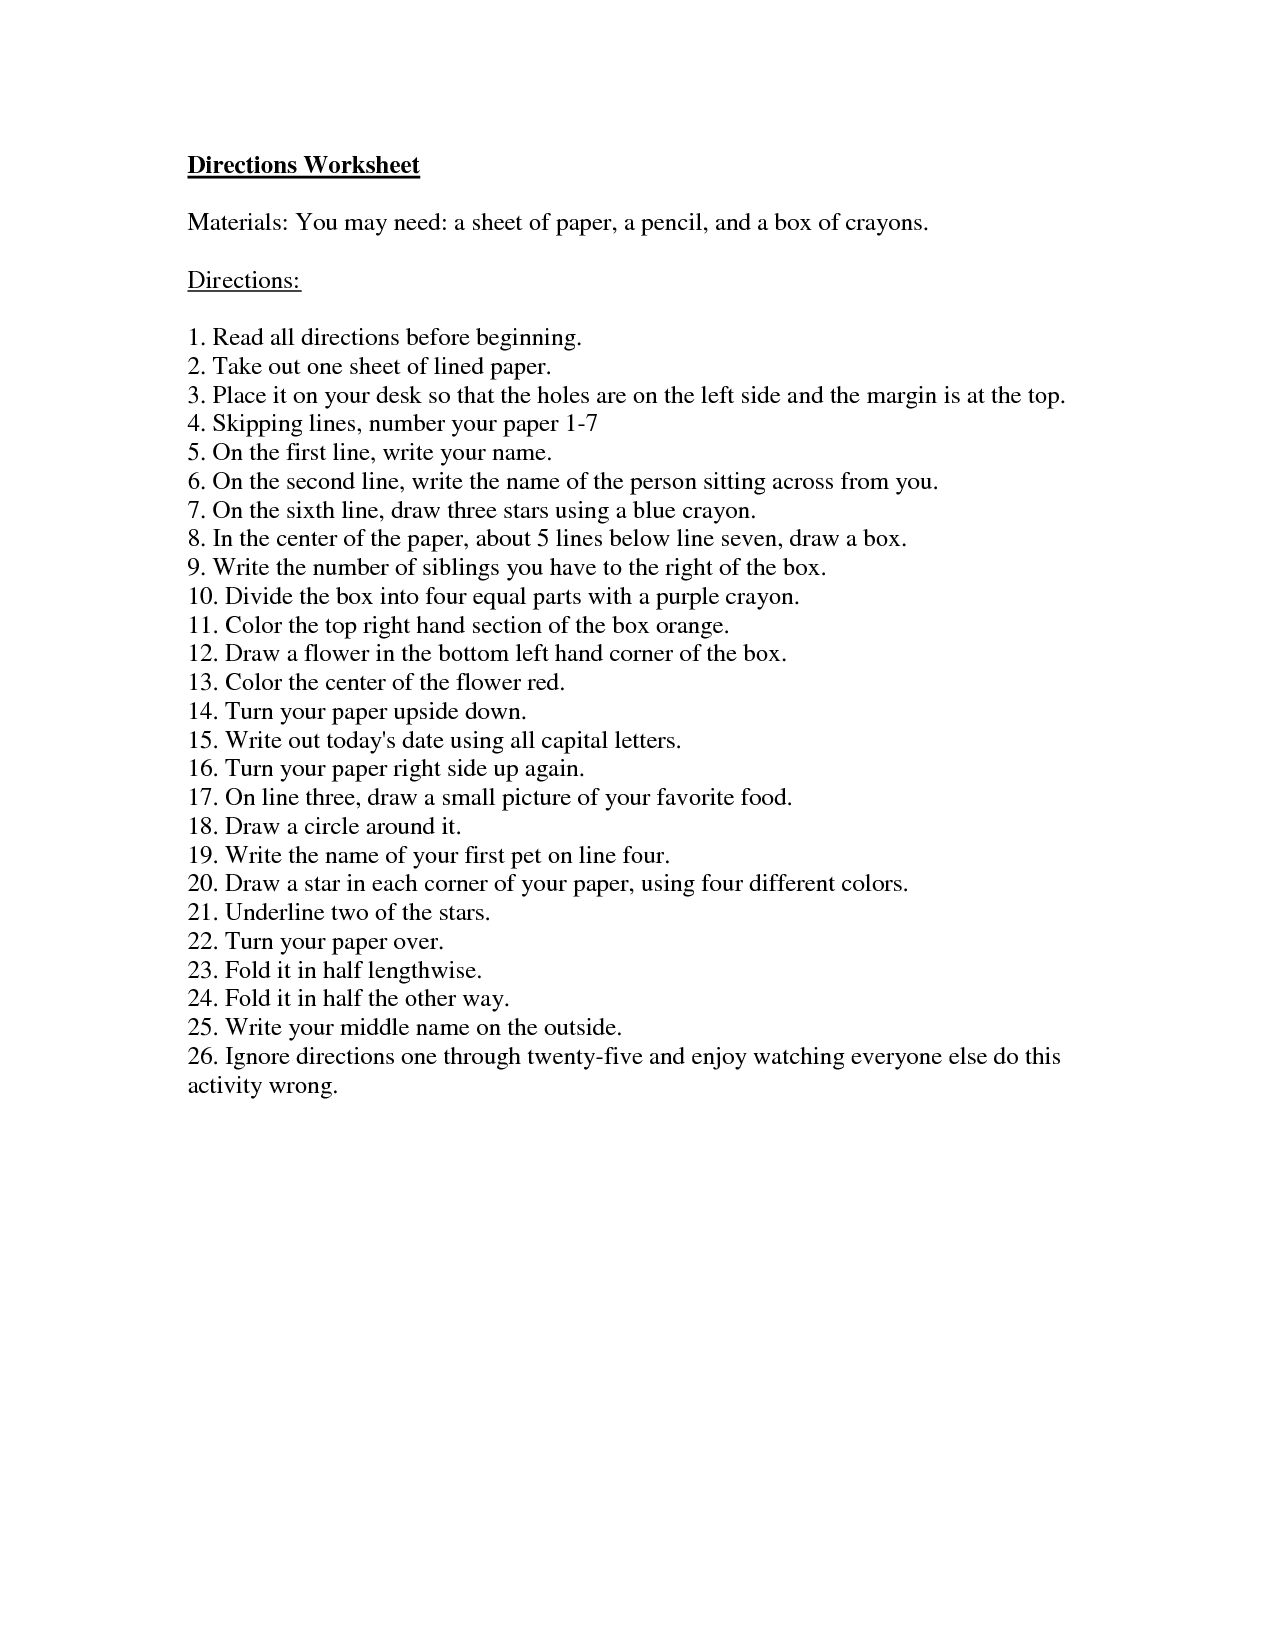 19-importance-of-following-rules-worksheet-worksheeto